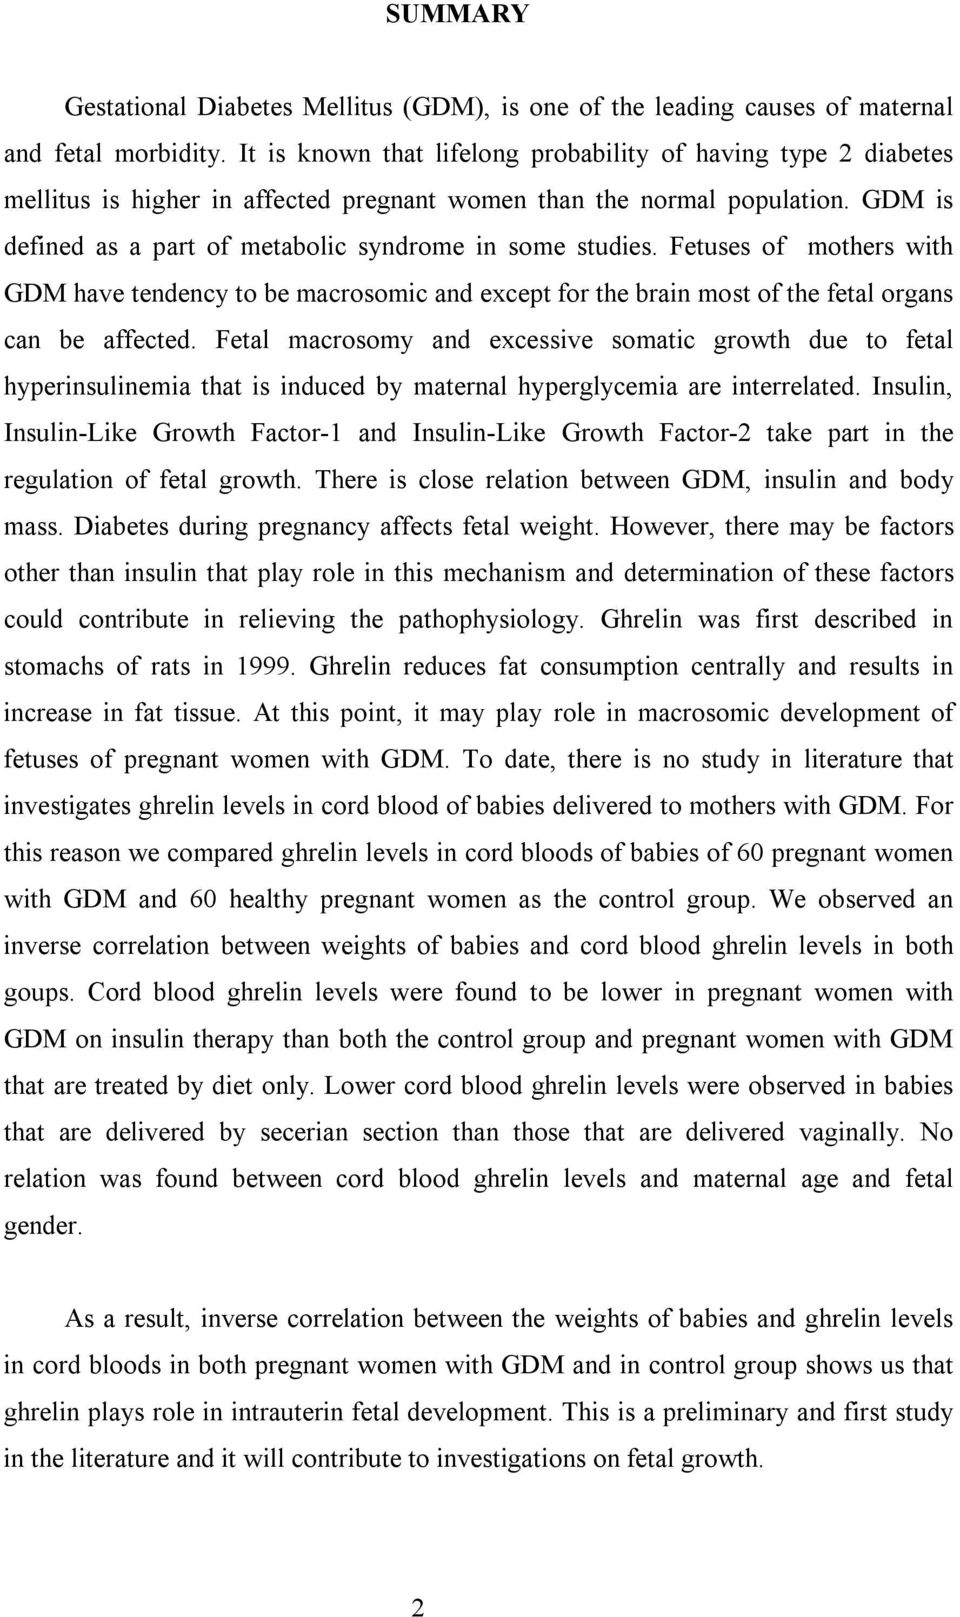 GDM is defined as a part of metabolic syndrome in some studies. Fetuses of mothers with GDM have tendency to be macrosomic and except for the brain most of the fetal organs can be affected.